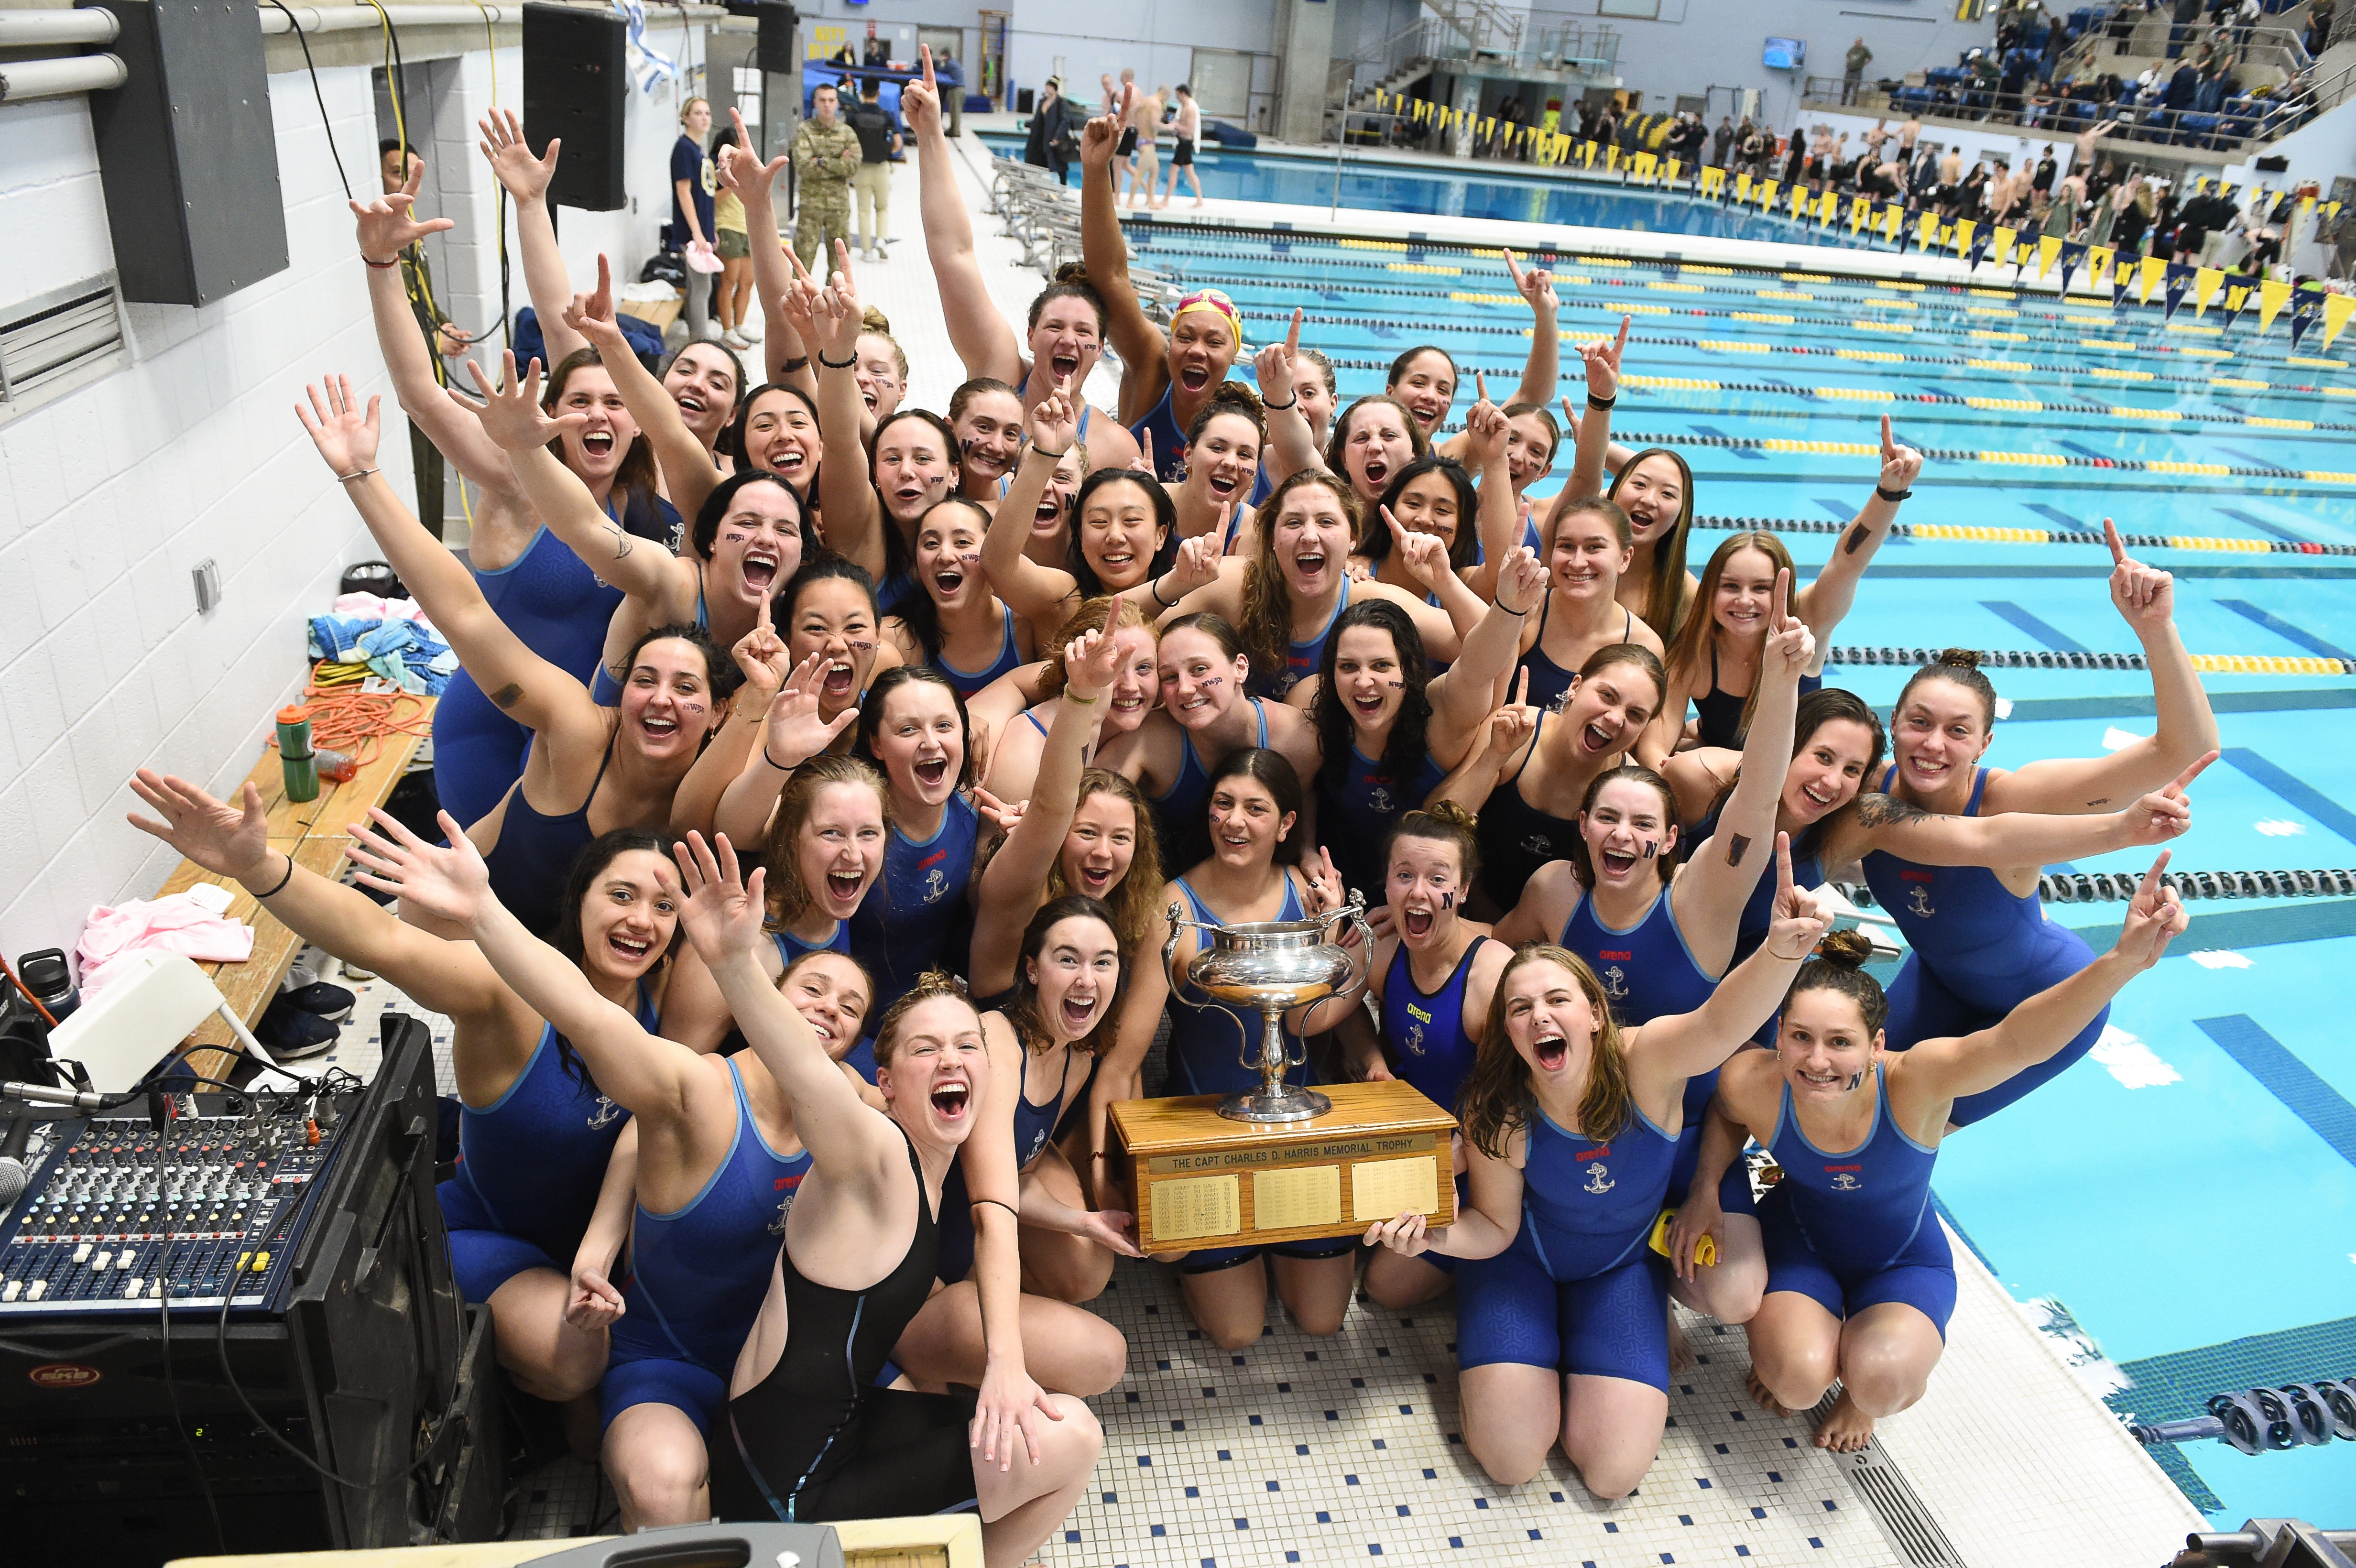 Women's Swimming Team Proudly Poses With Trophy